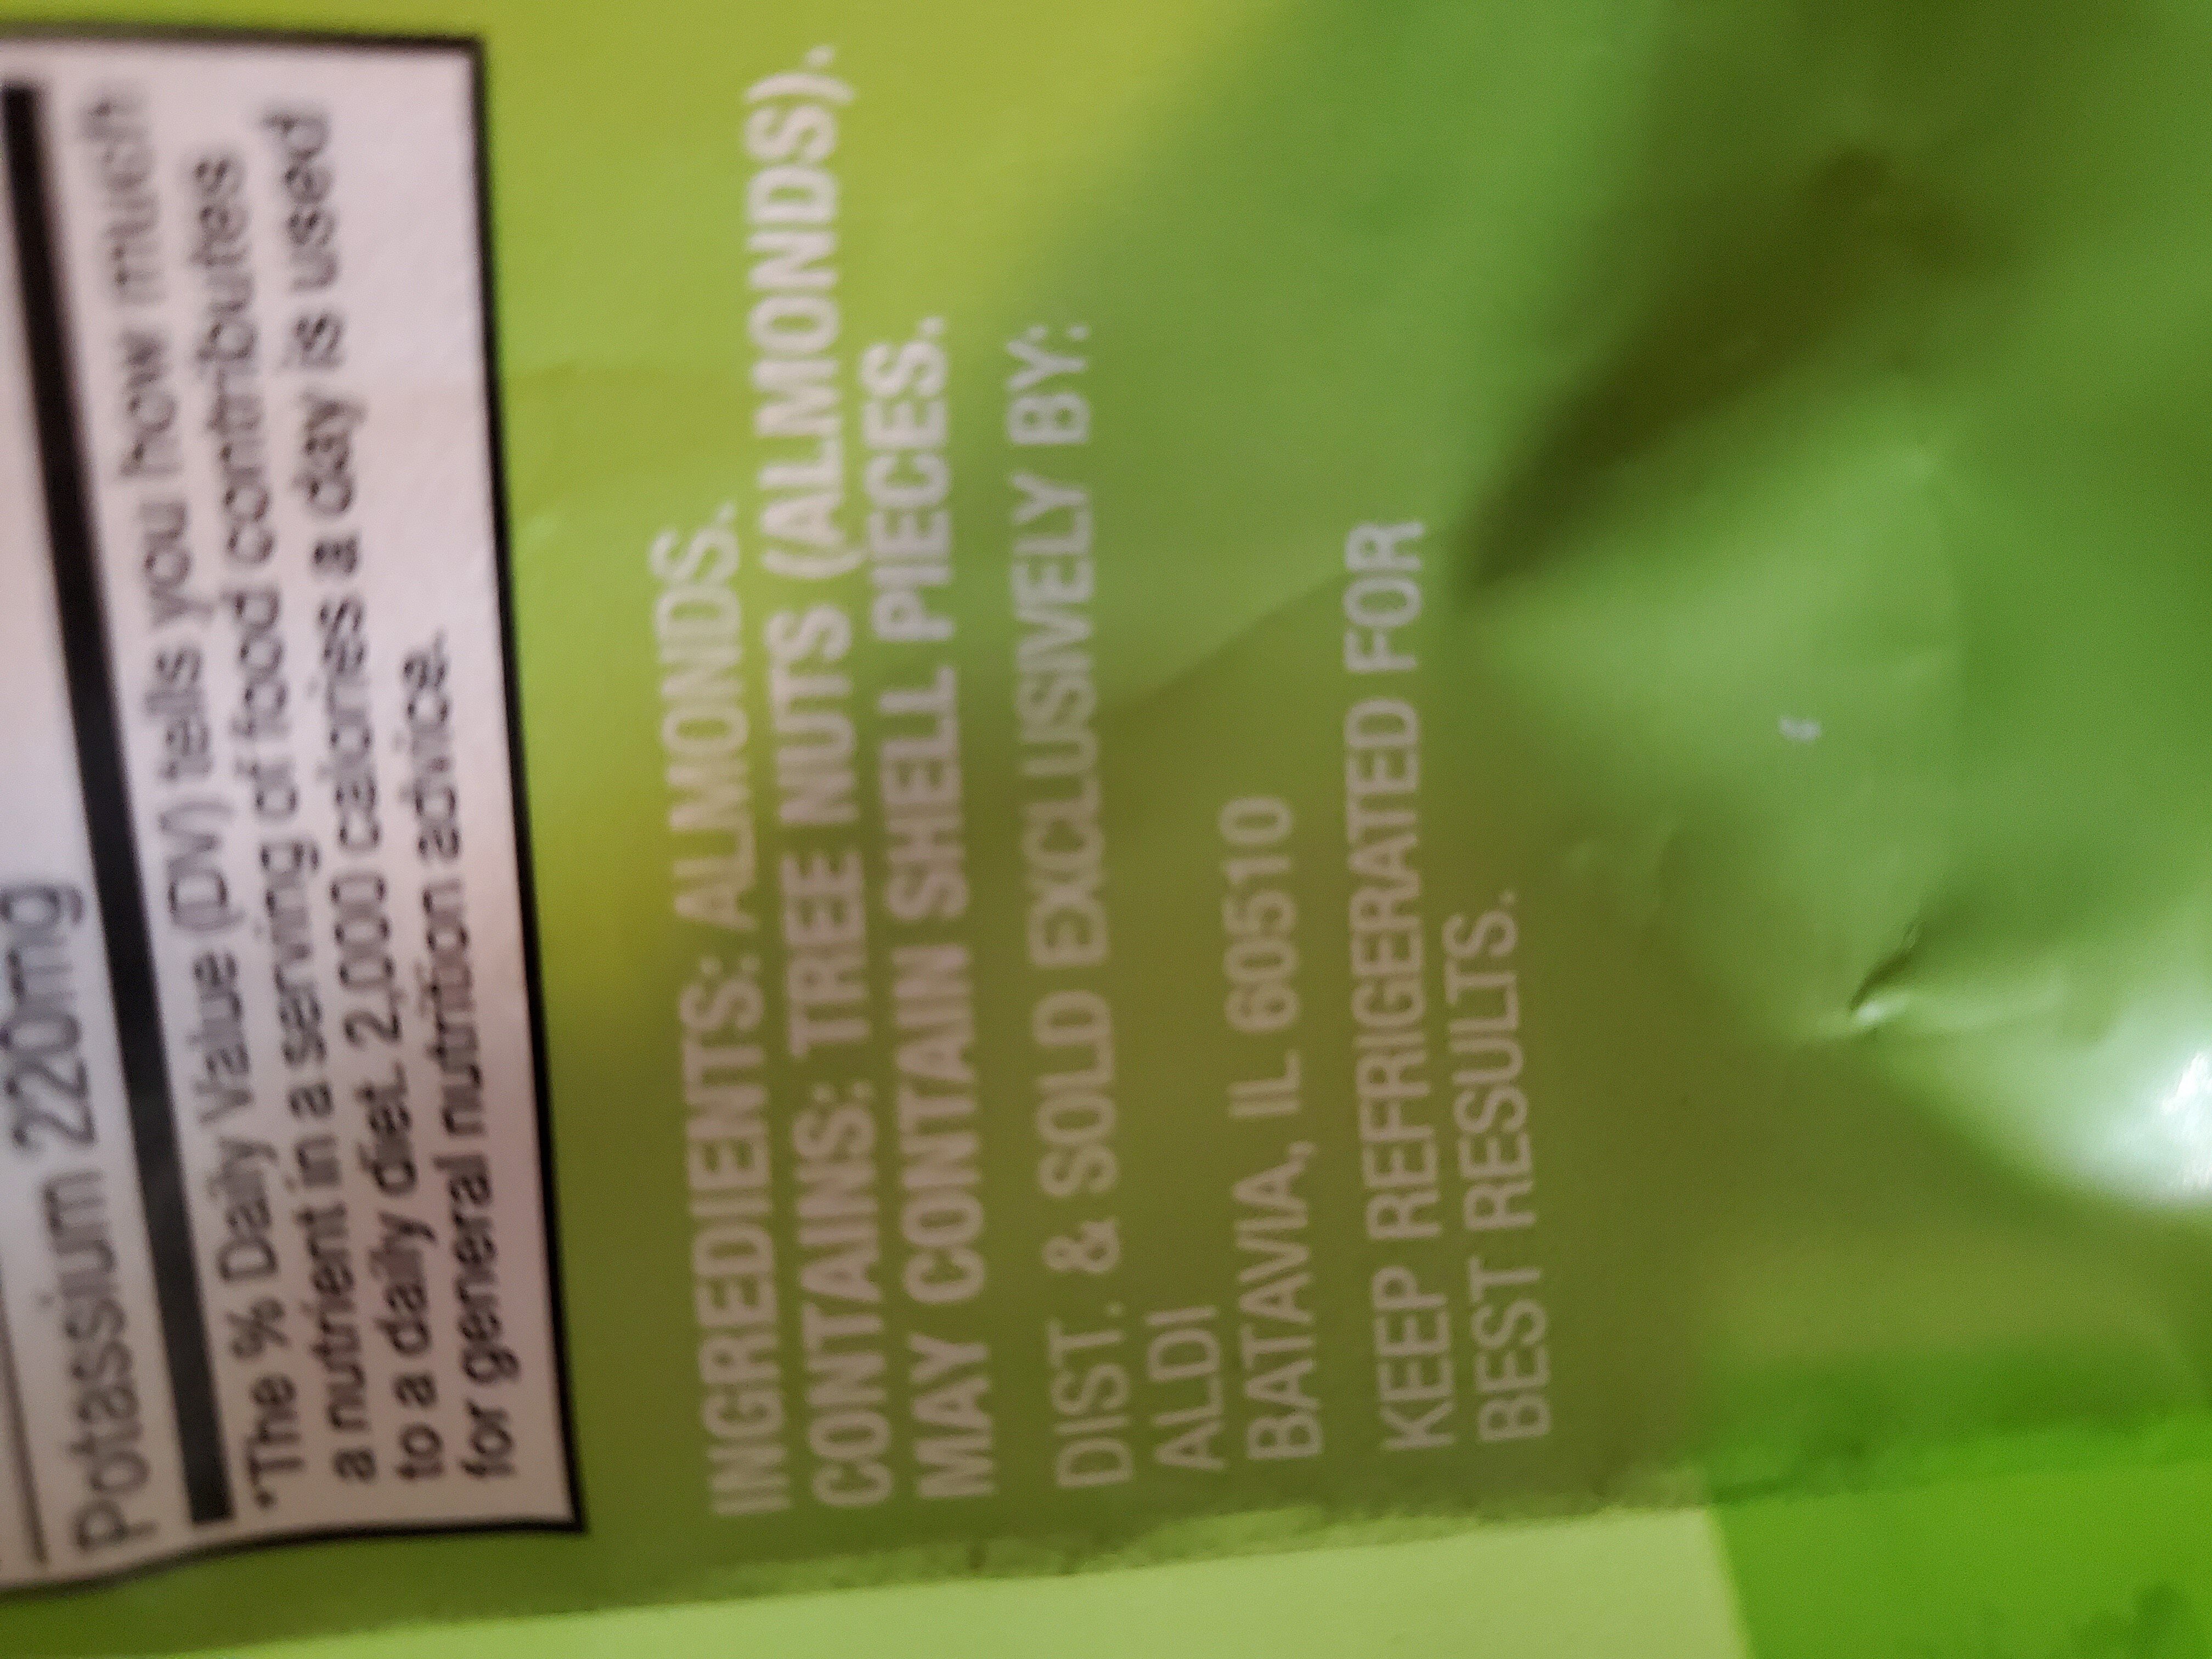 Almonds Unsalted - Ingredients